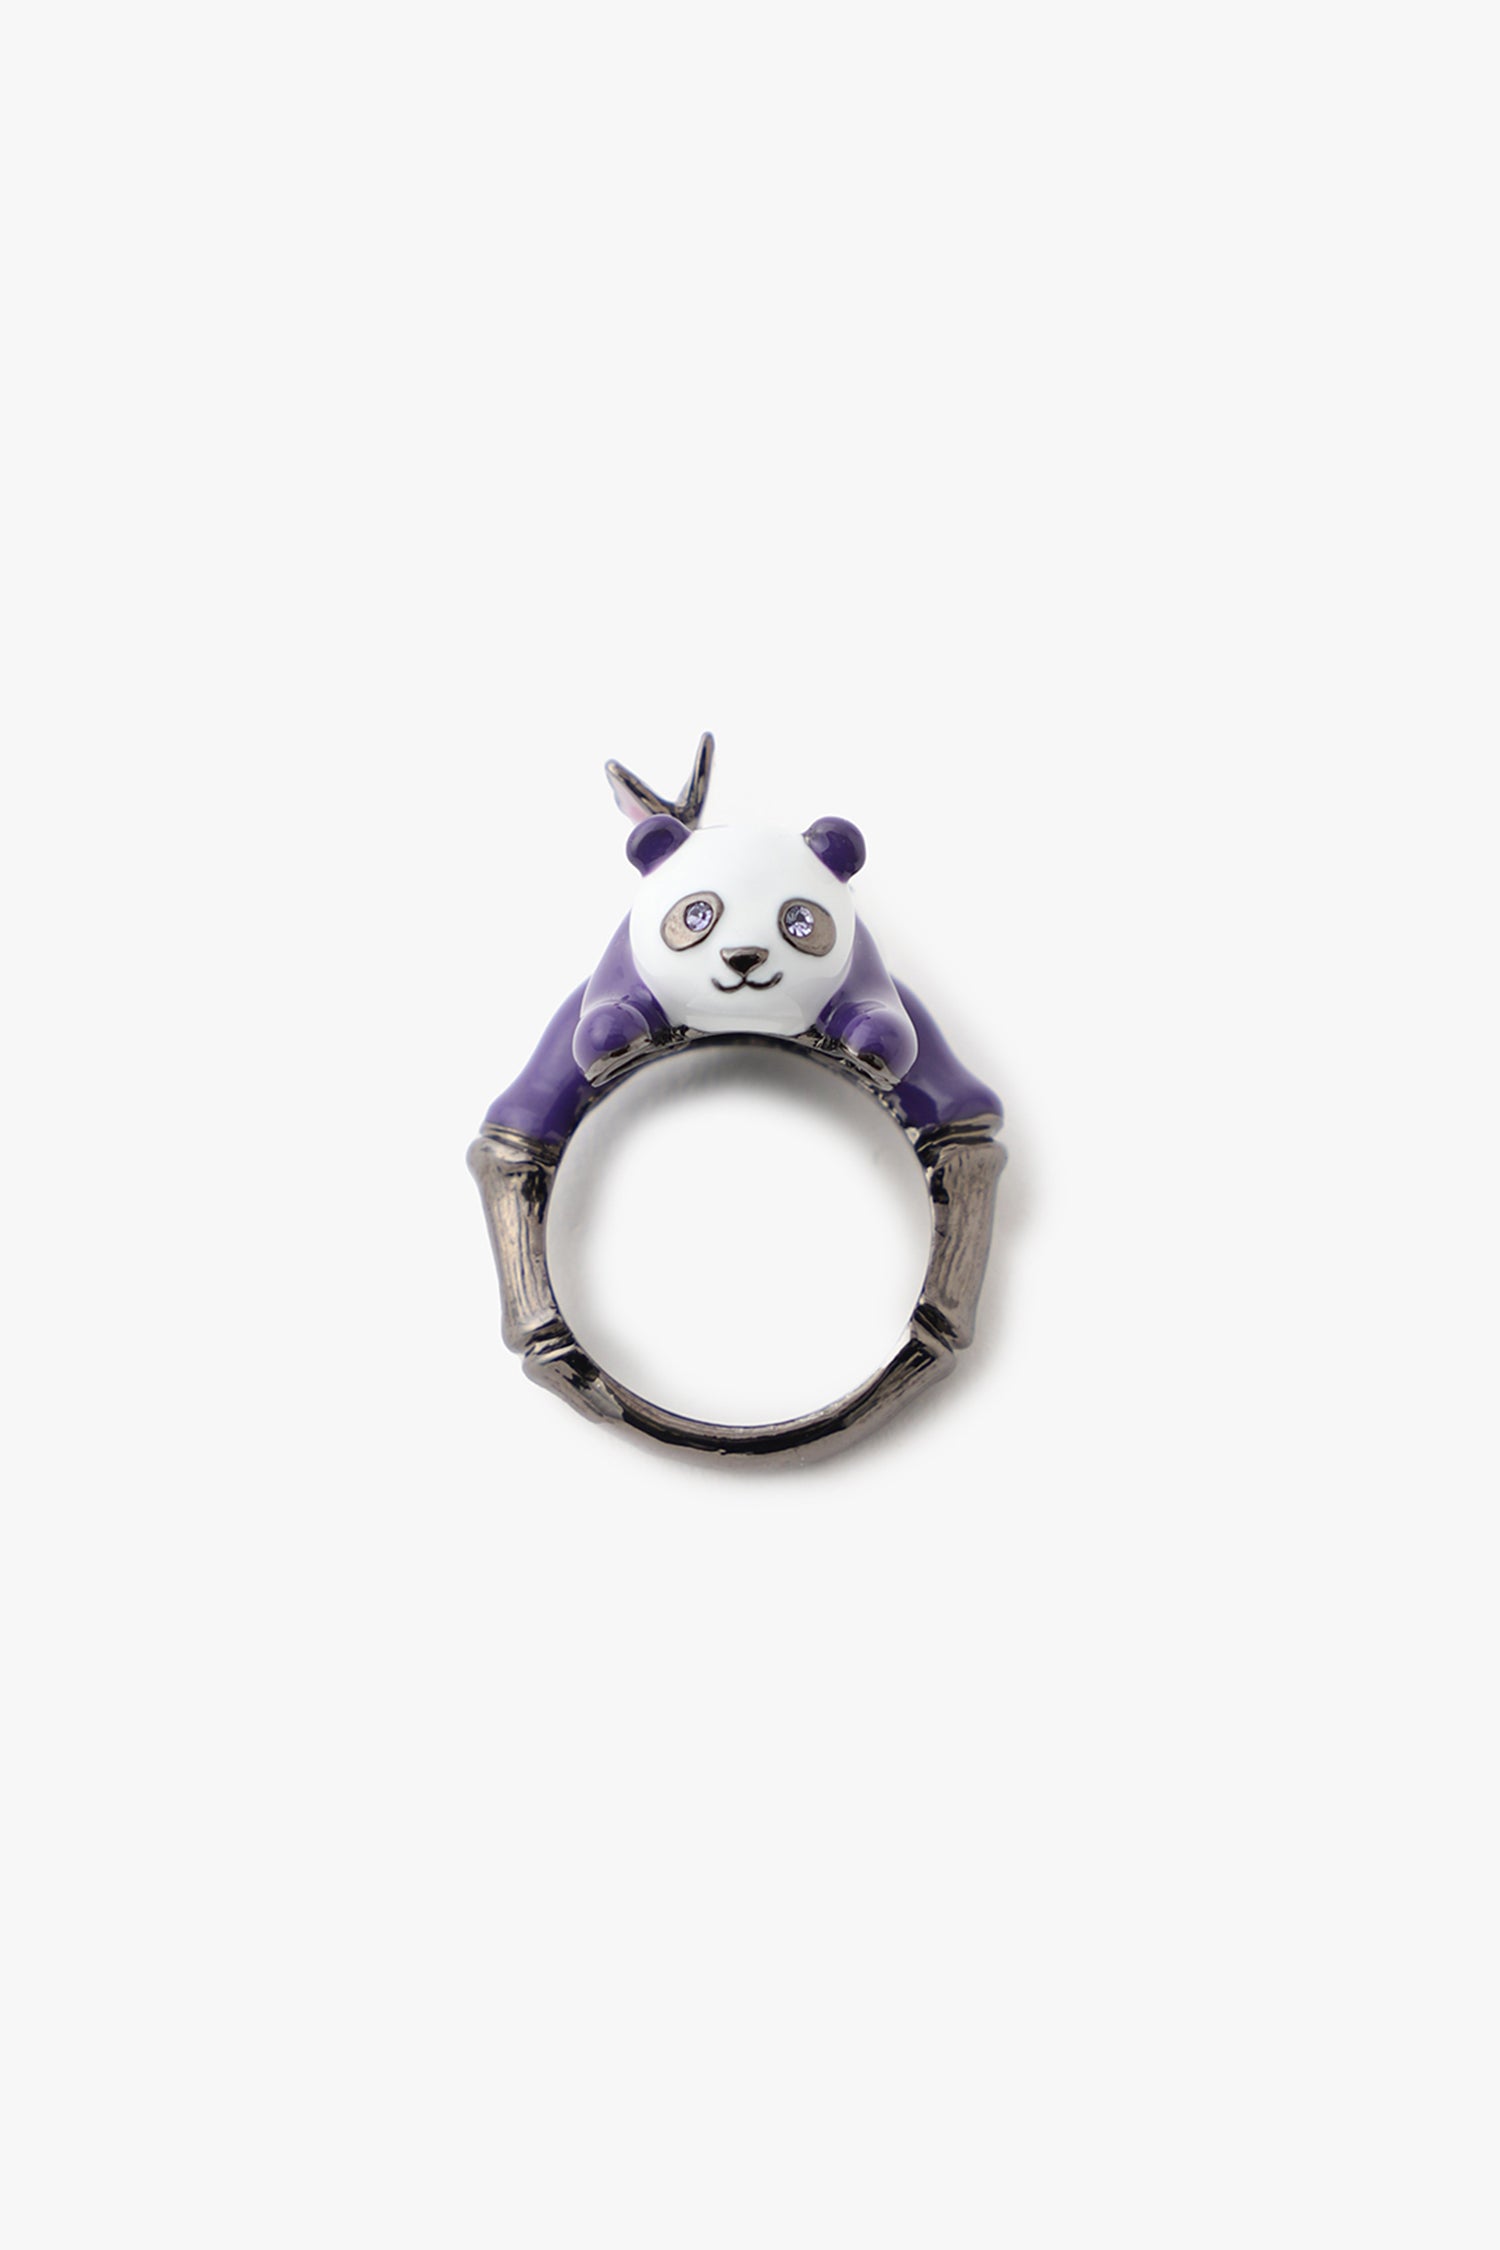 Panda on gunmetal Ring, white on head and body, purple arms legs and ears, embellished eyes gems